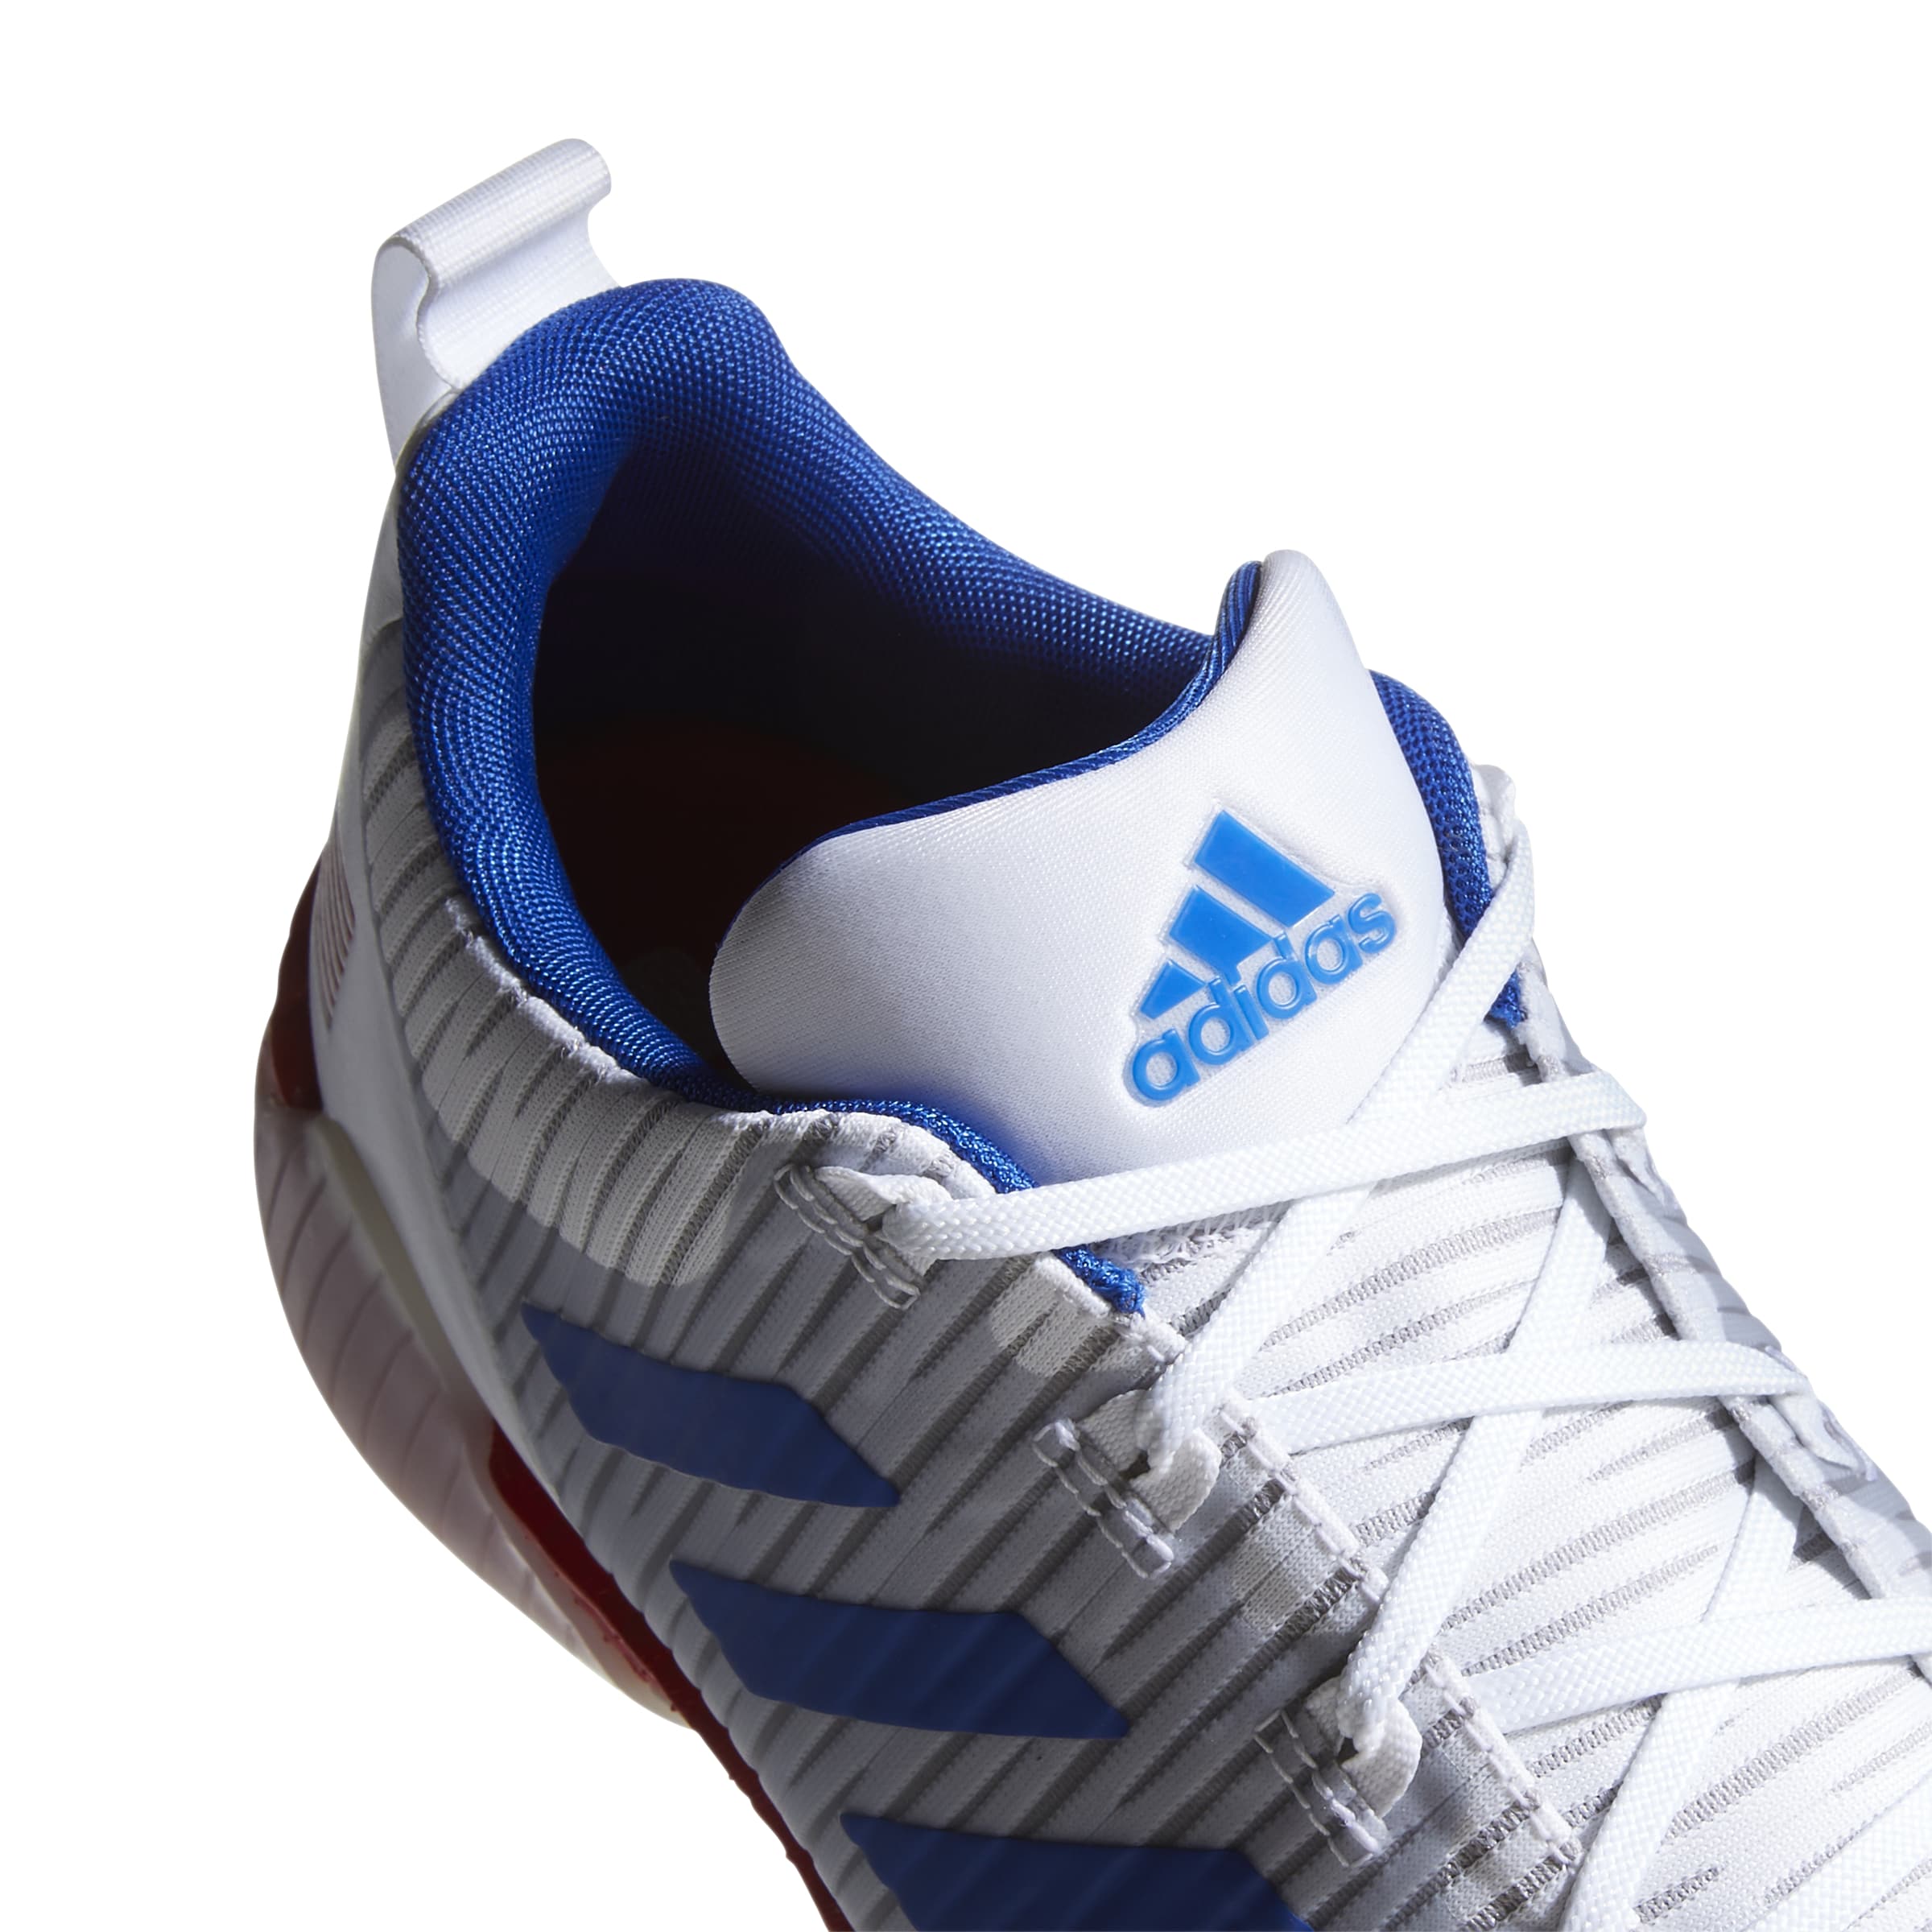 Adidas releases Codechaos golf shoes in ultra-patriotic, limited ...